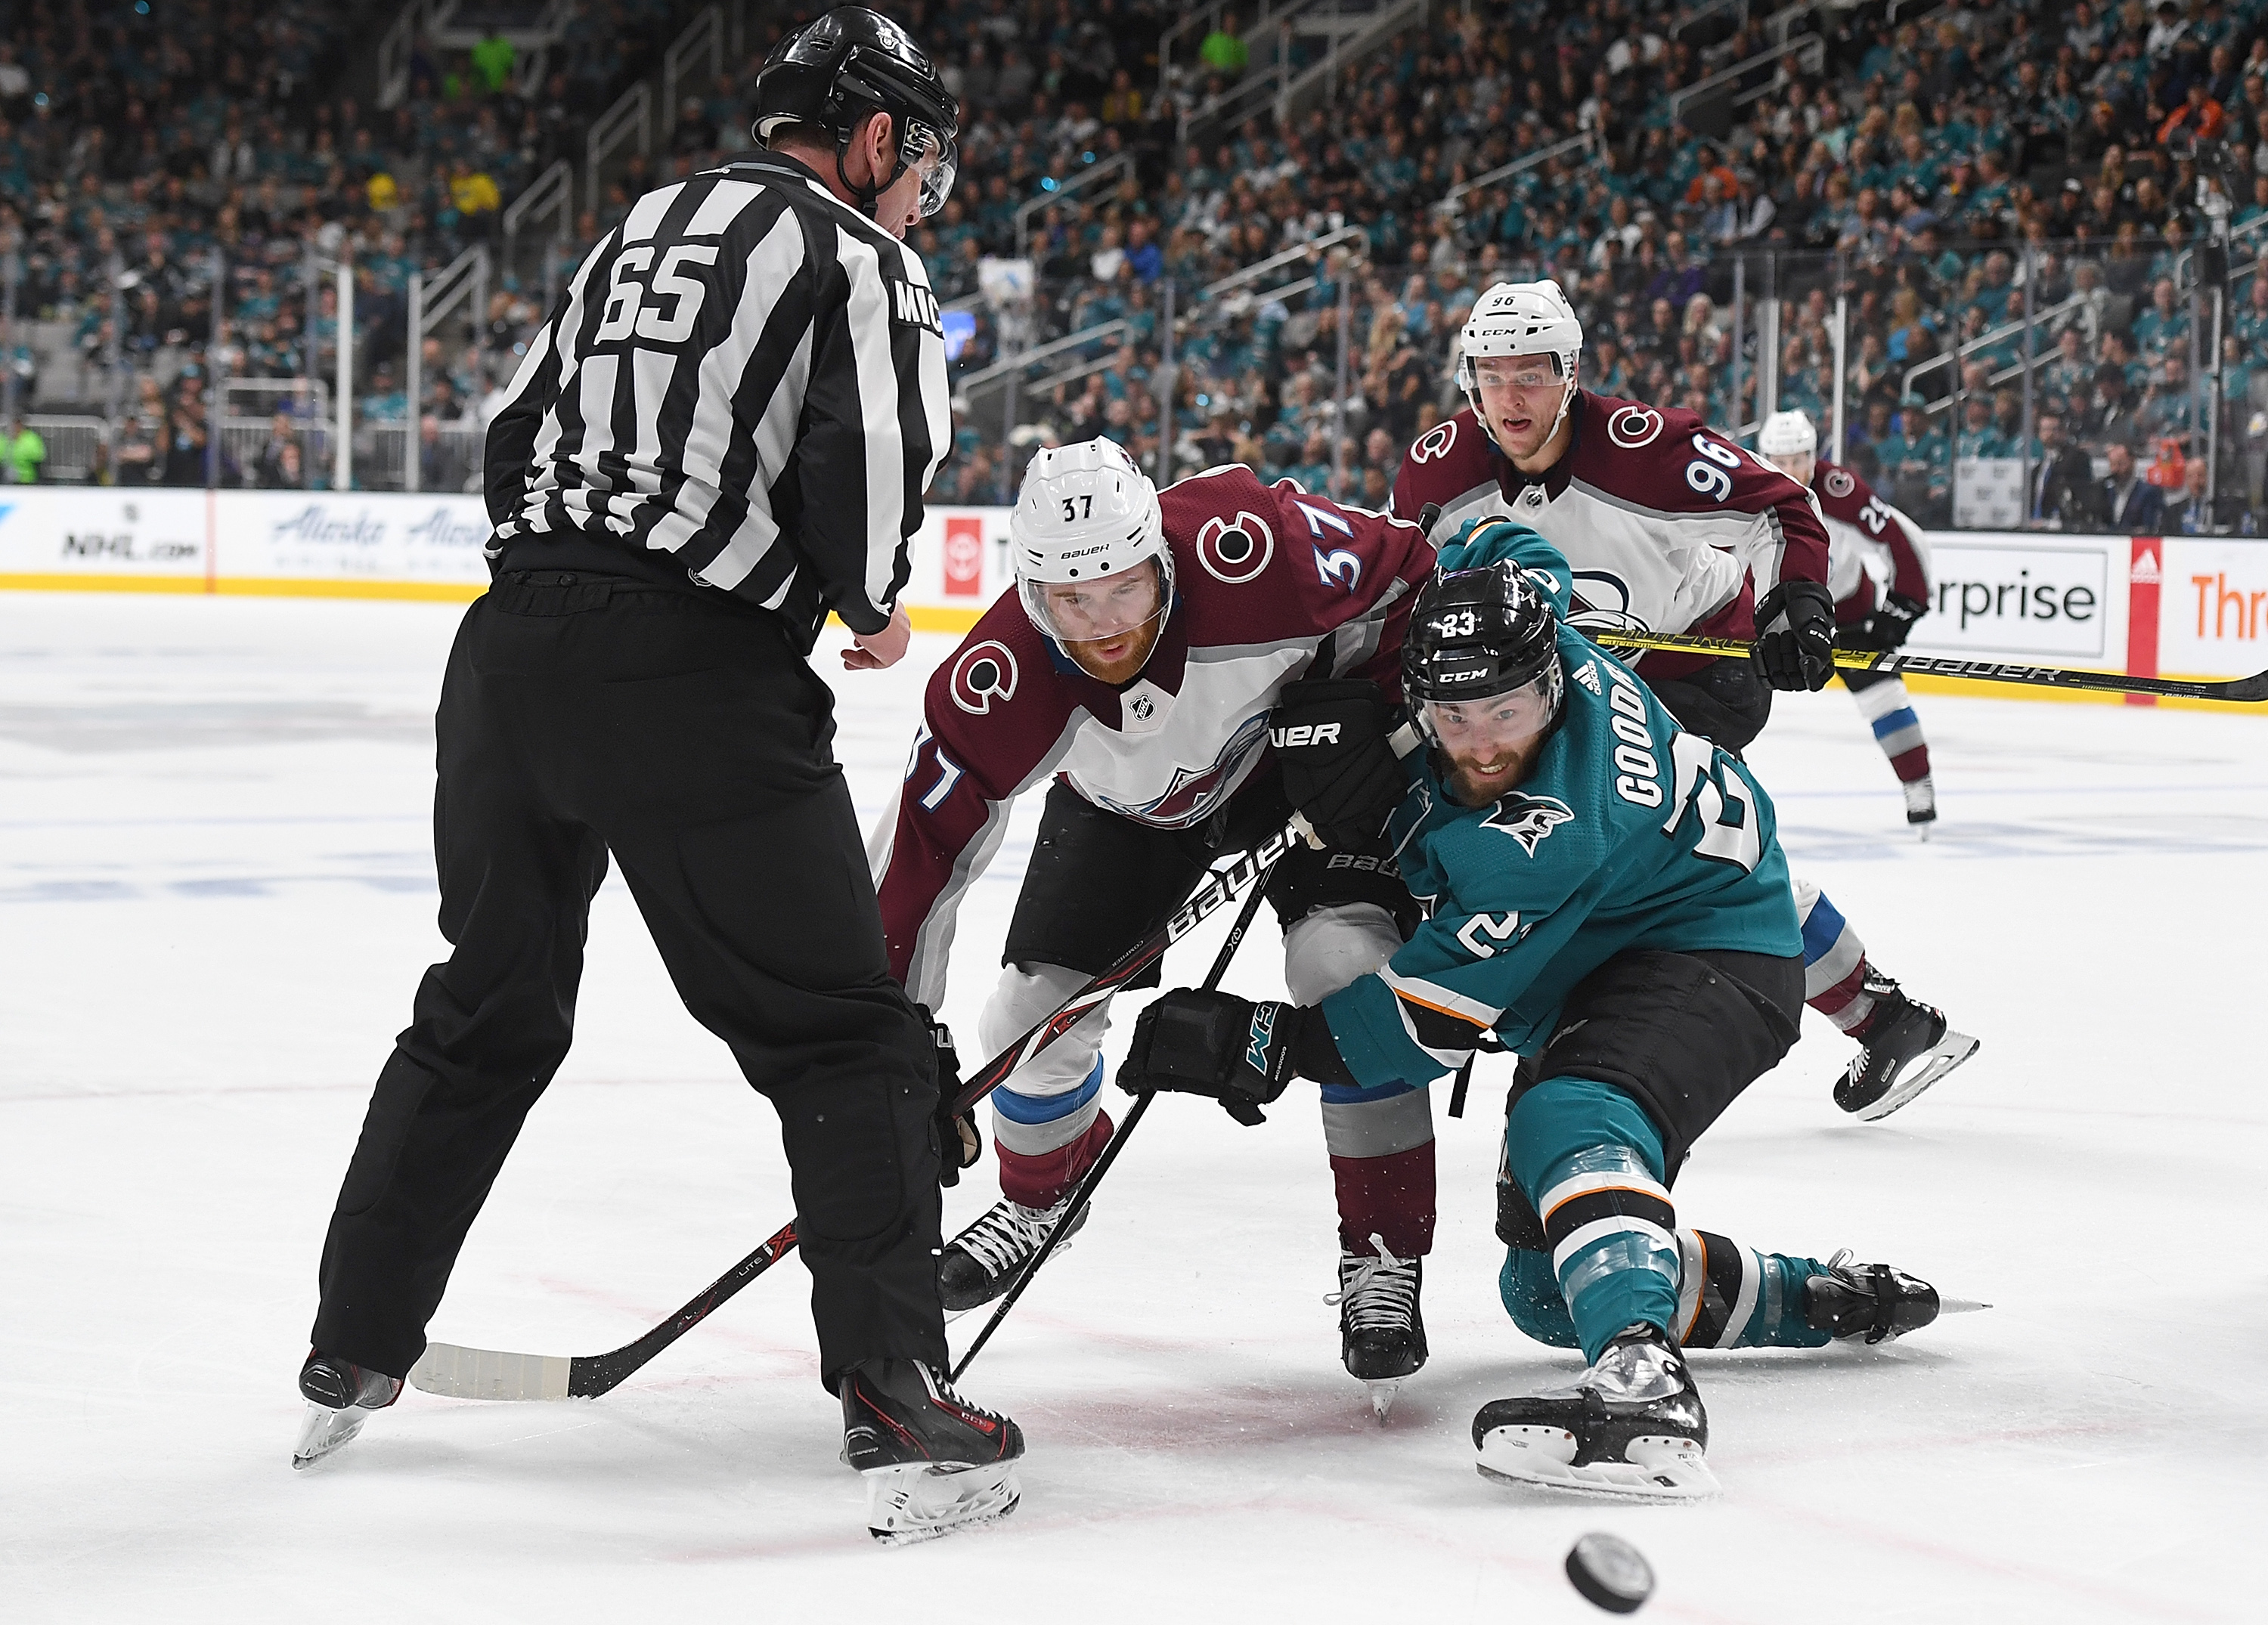 Barclay Goodrow of the San Jose Sharks and J.T. Compher of the Colorado Avalanche battles for a faceoff during the third period in Game 1 of the Western Conference Second Round during the 2019 NHL Stanley Cup Playoffs at SAP Center on April 26, 2019 in Sa